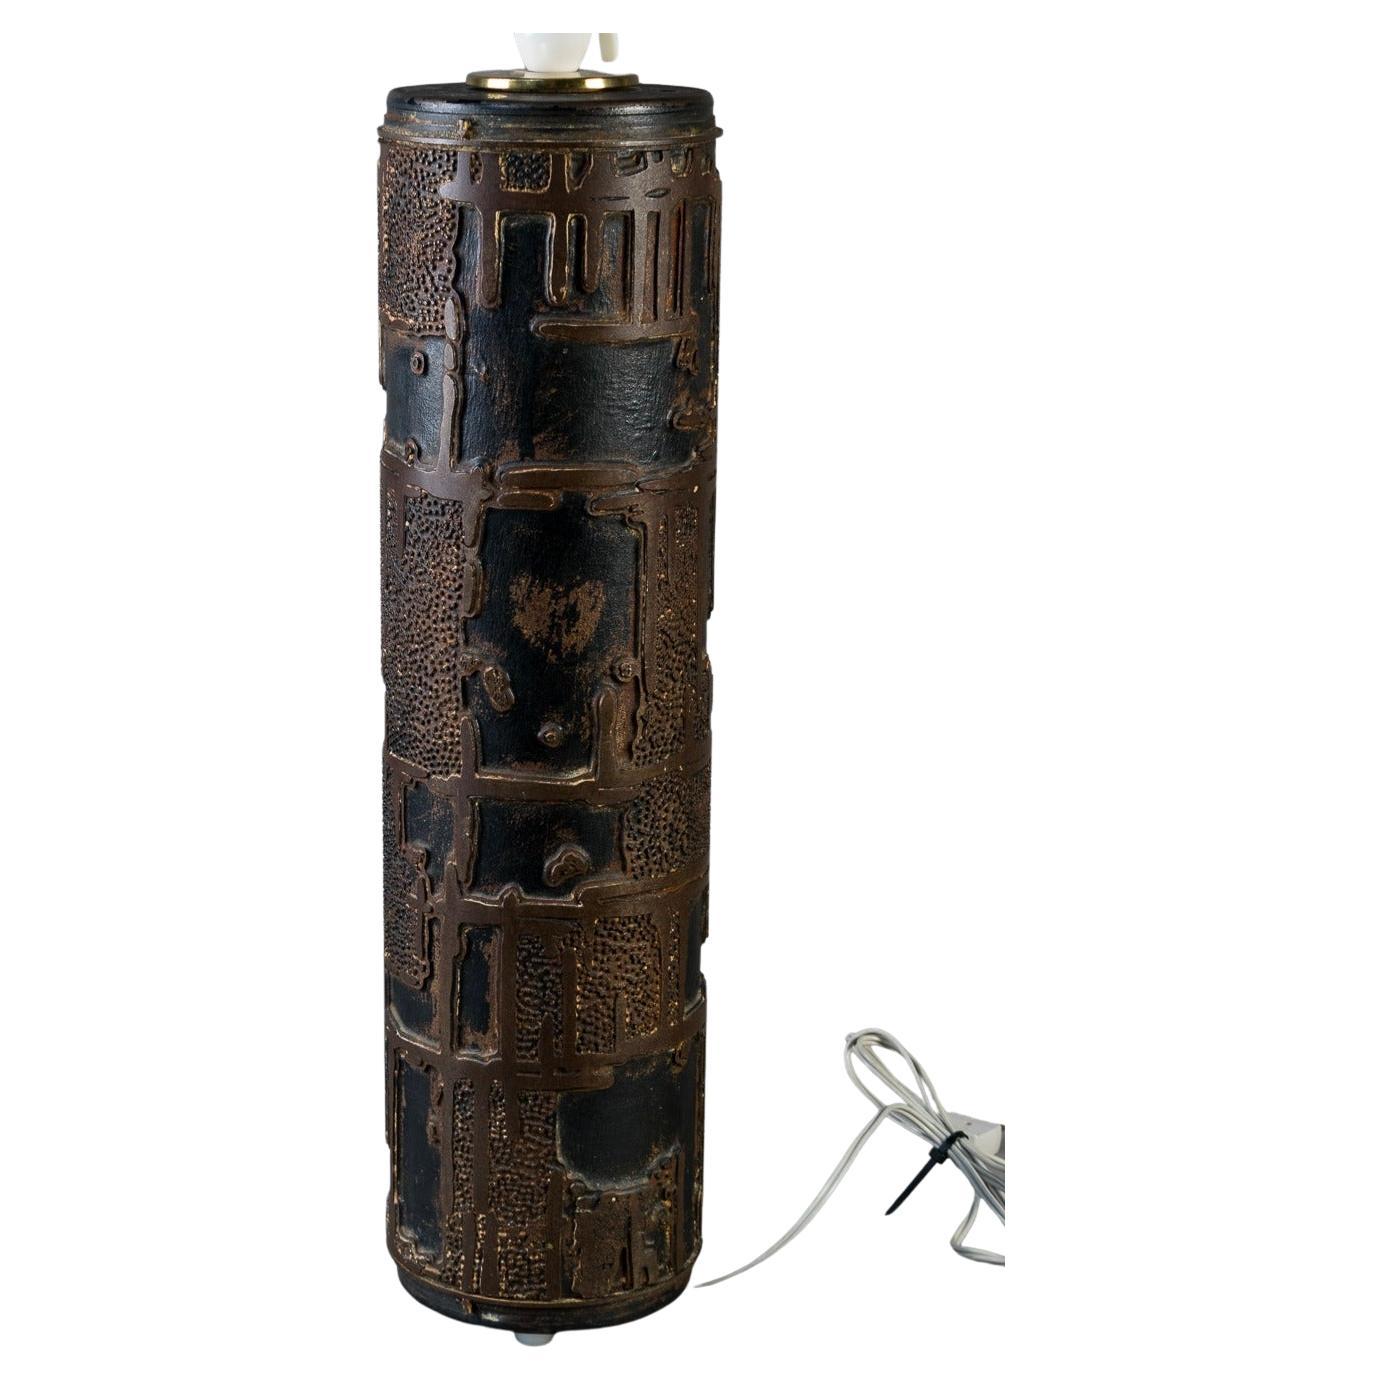 Danish industrial table lamp, modified from vintage tapestry wallpaper roller in metal.

A stunning large-scale vintage wallpaper rollers as lamps, circa 1940. Heavy metal cylinder form decorated with solid brass motifs. Accents of lacquered steel